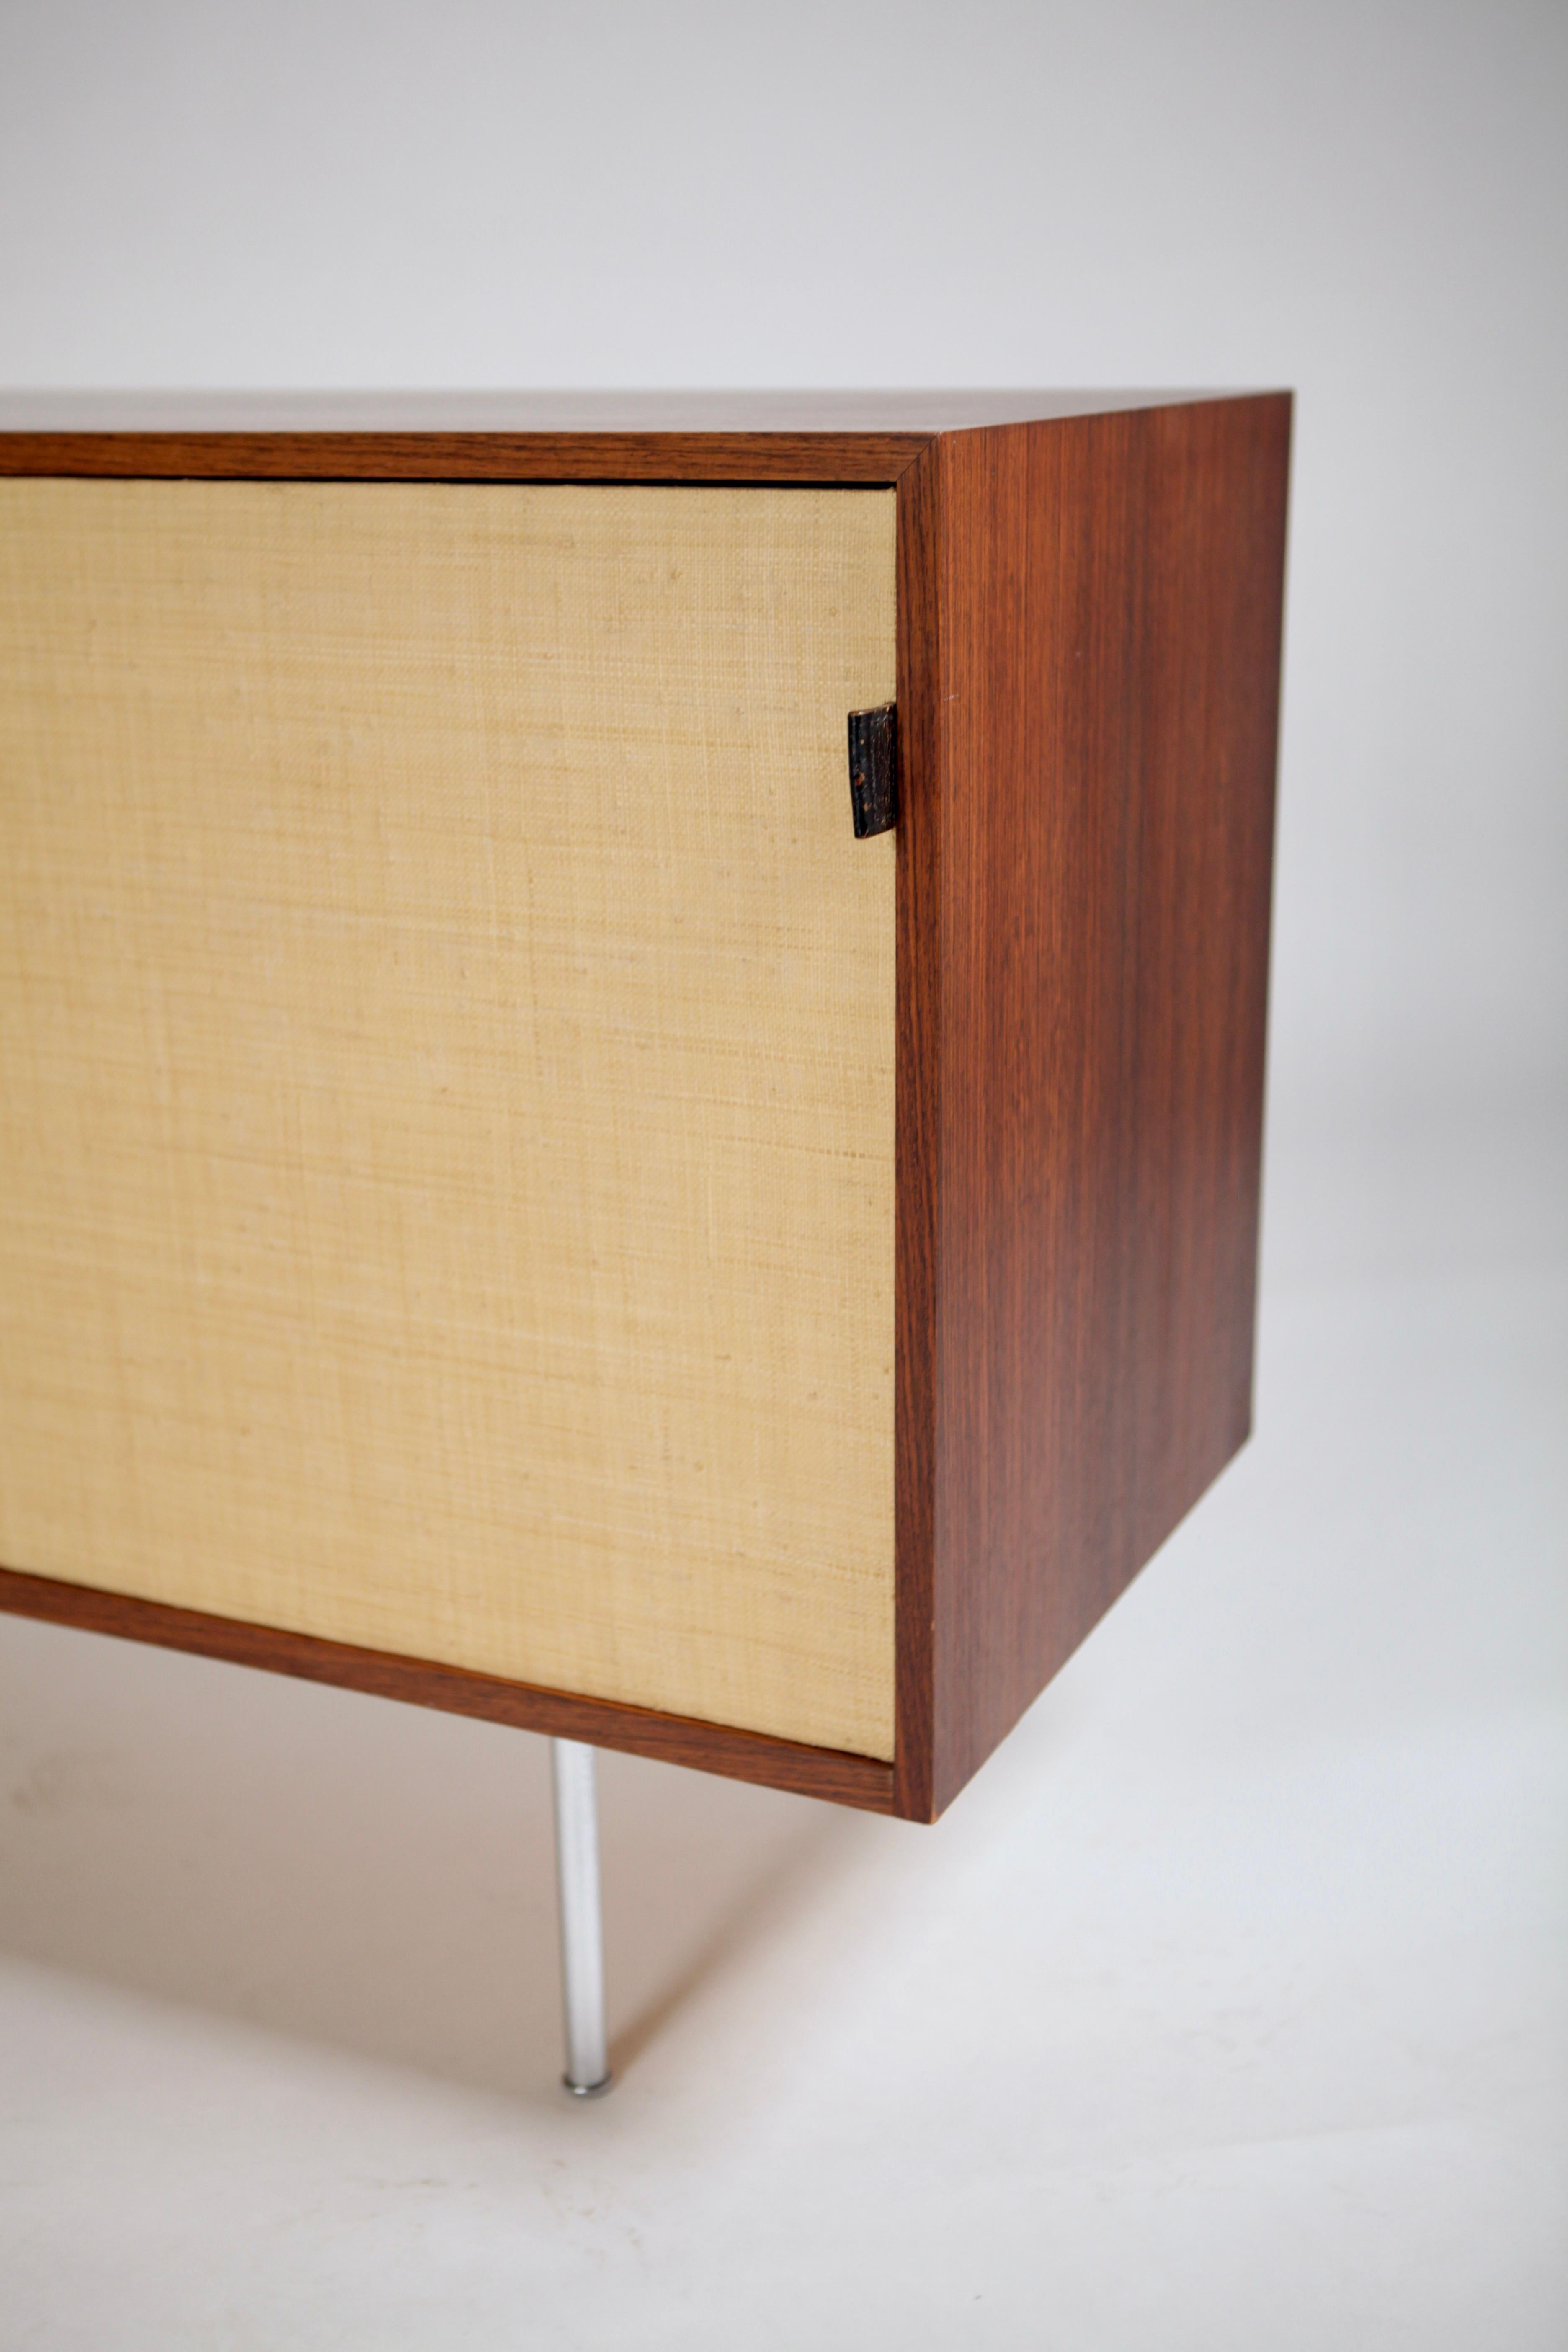 Sideboard in East Indian Rosewood & Seagrass by Florence Knoll, Designed 1947 For Sale 8